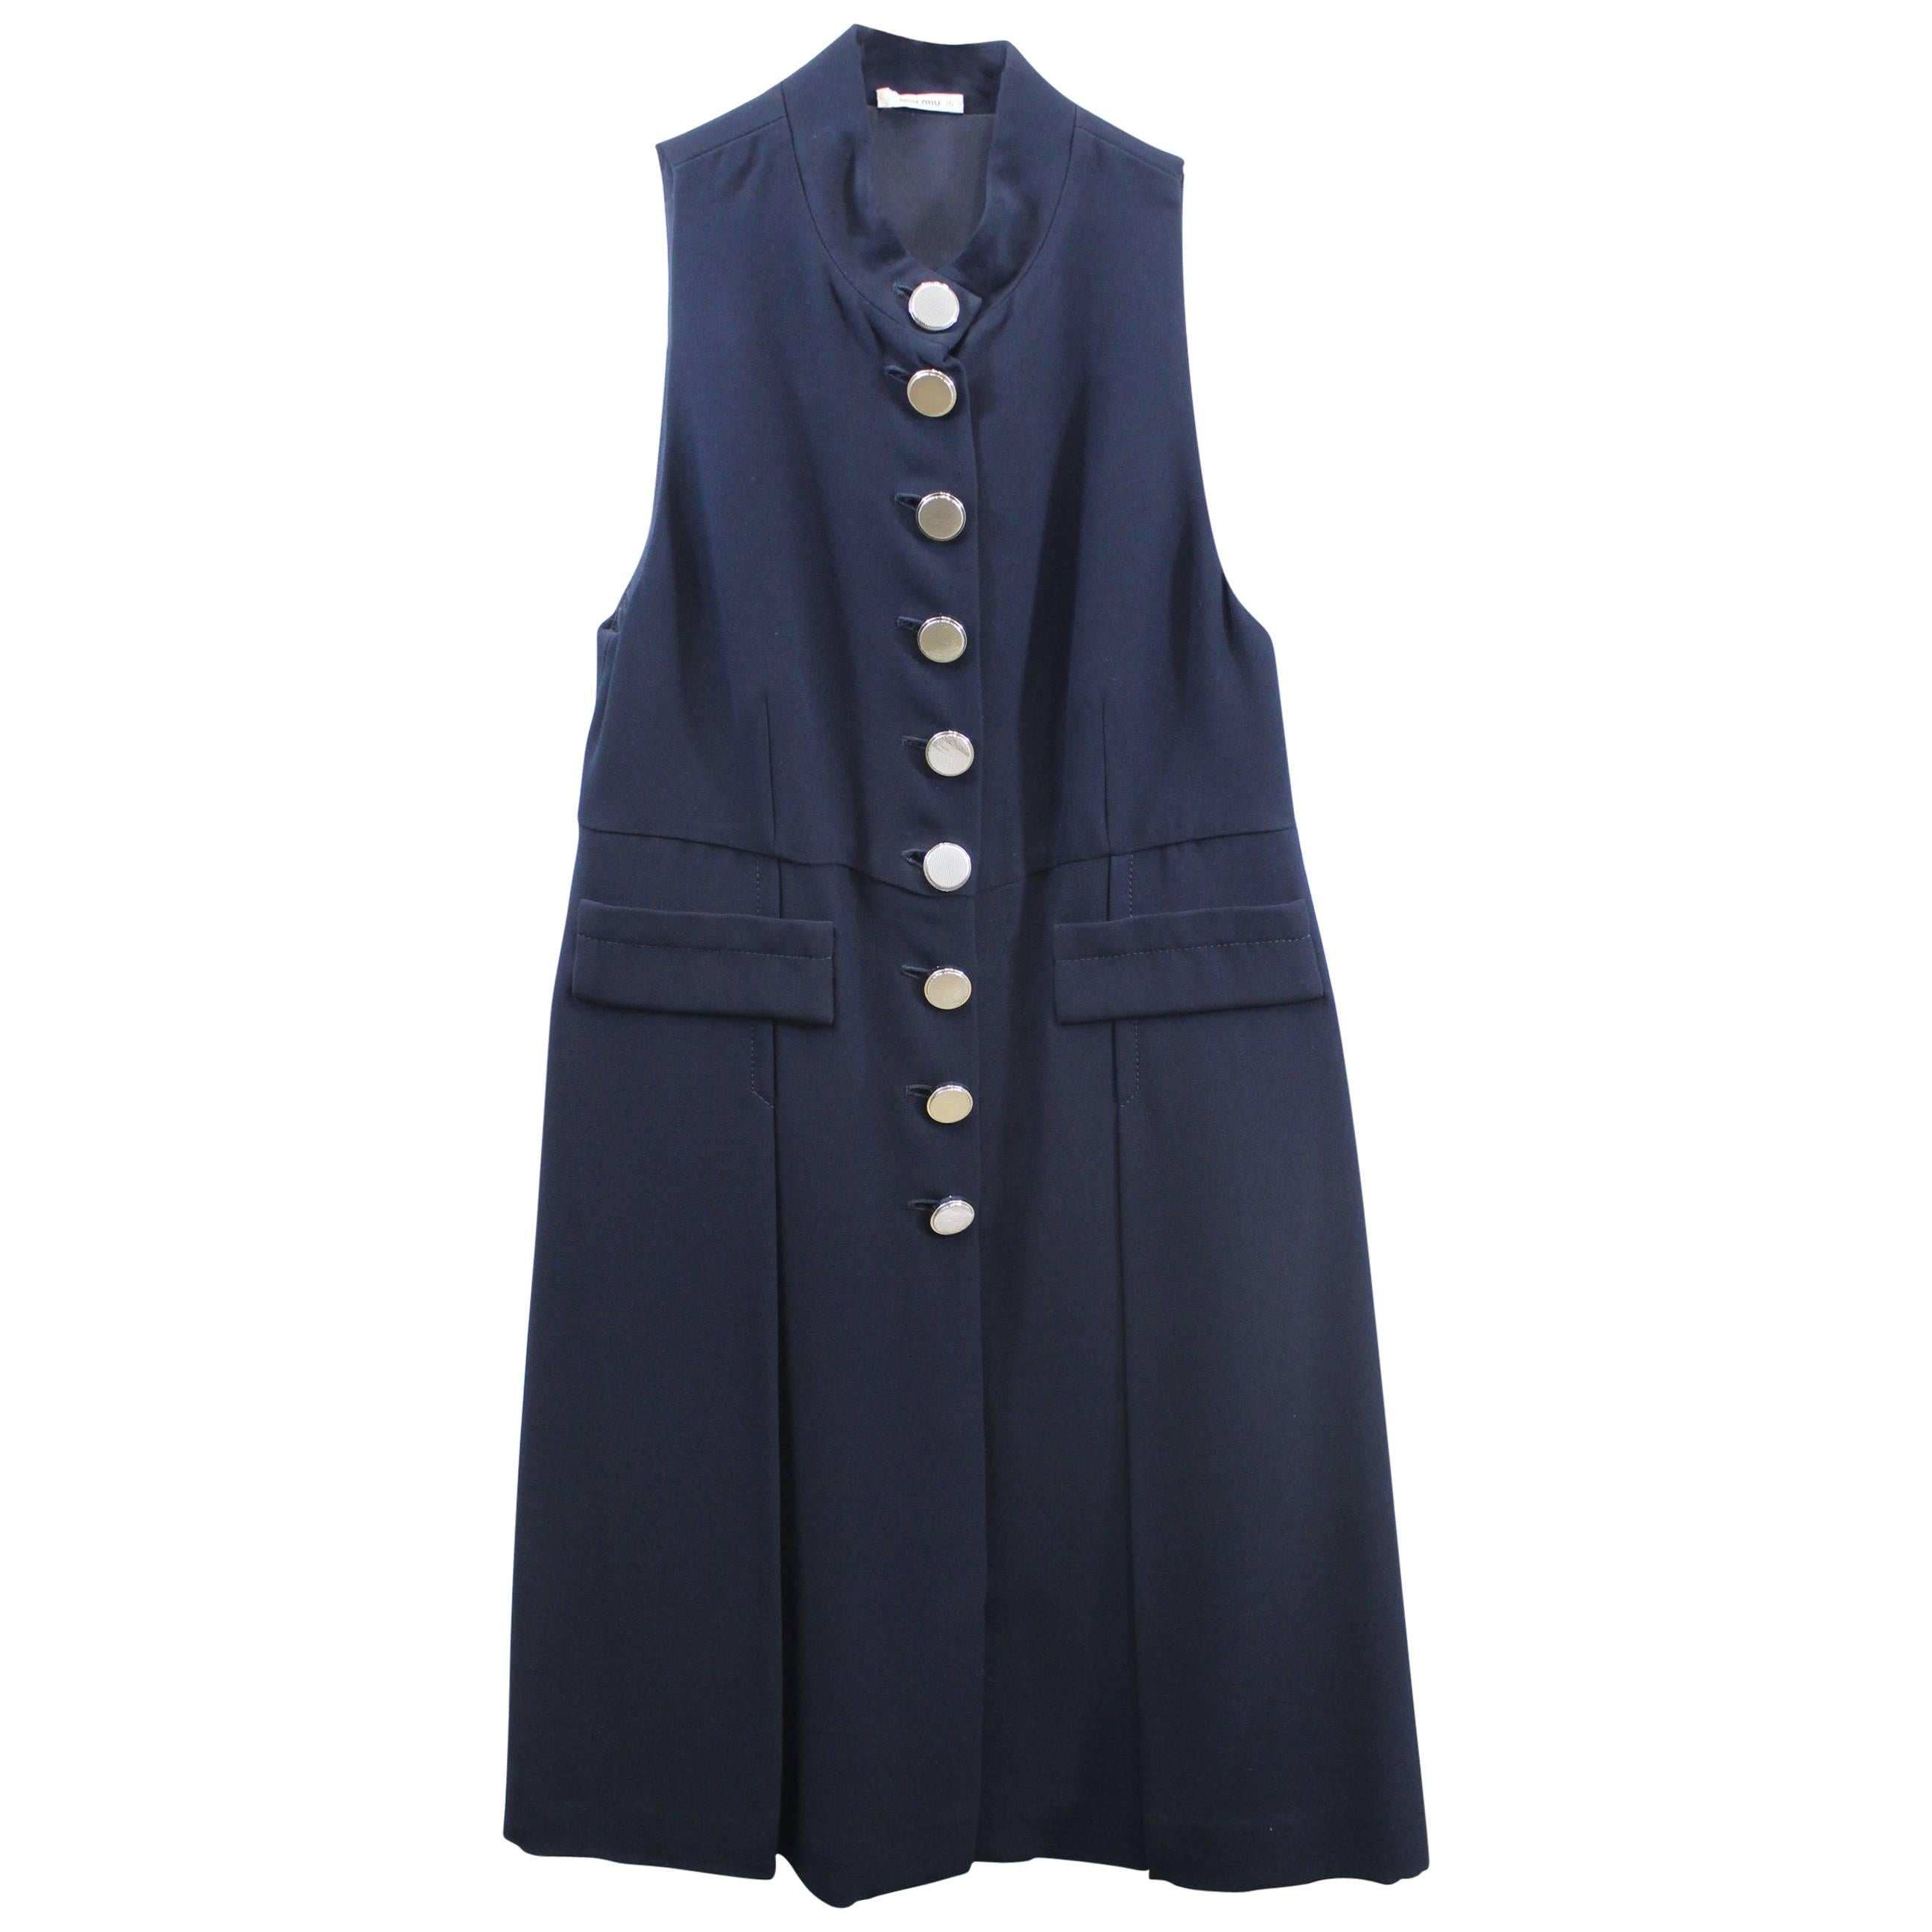 Miu Miu Navy Day Dress in excellent condition. Retail Price 1300$. S 36 For Sale